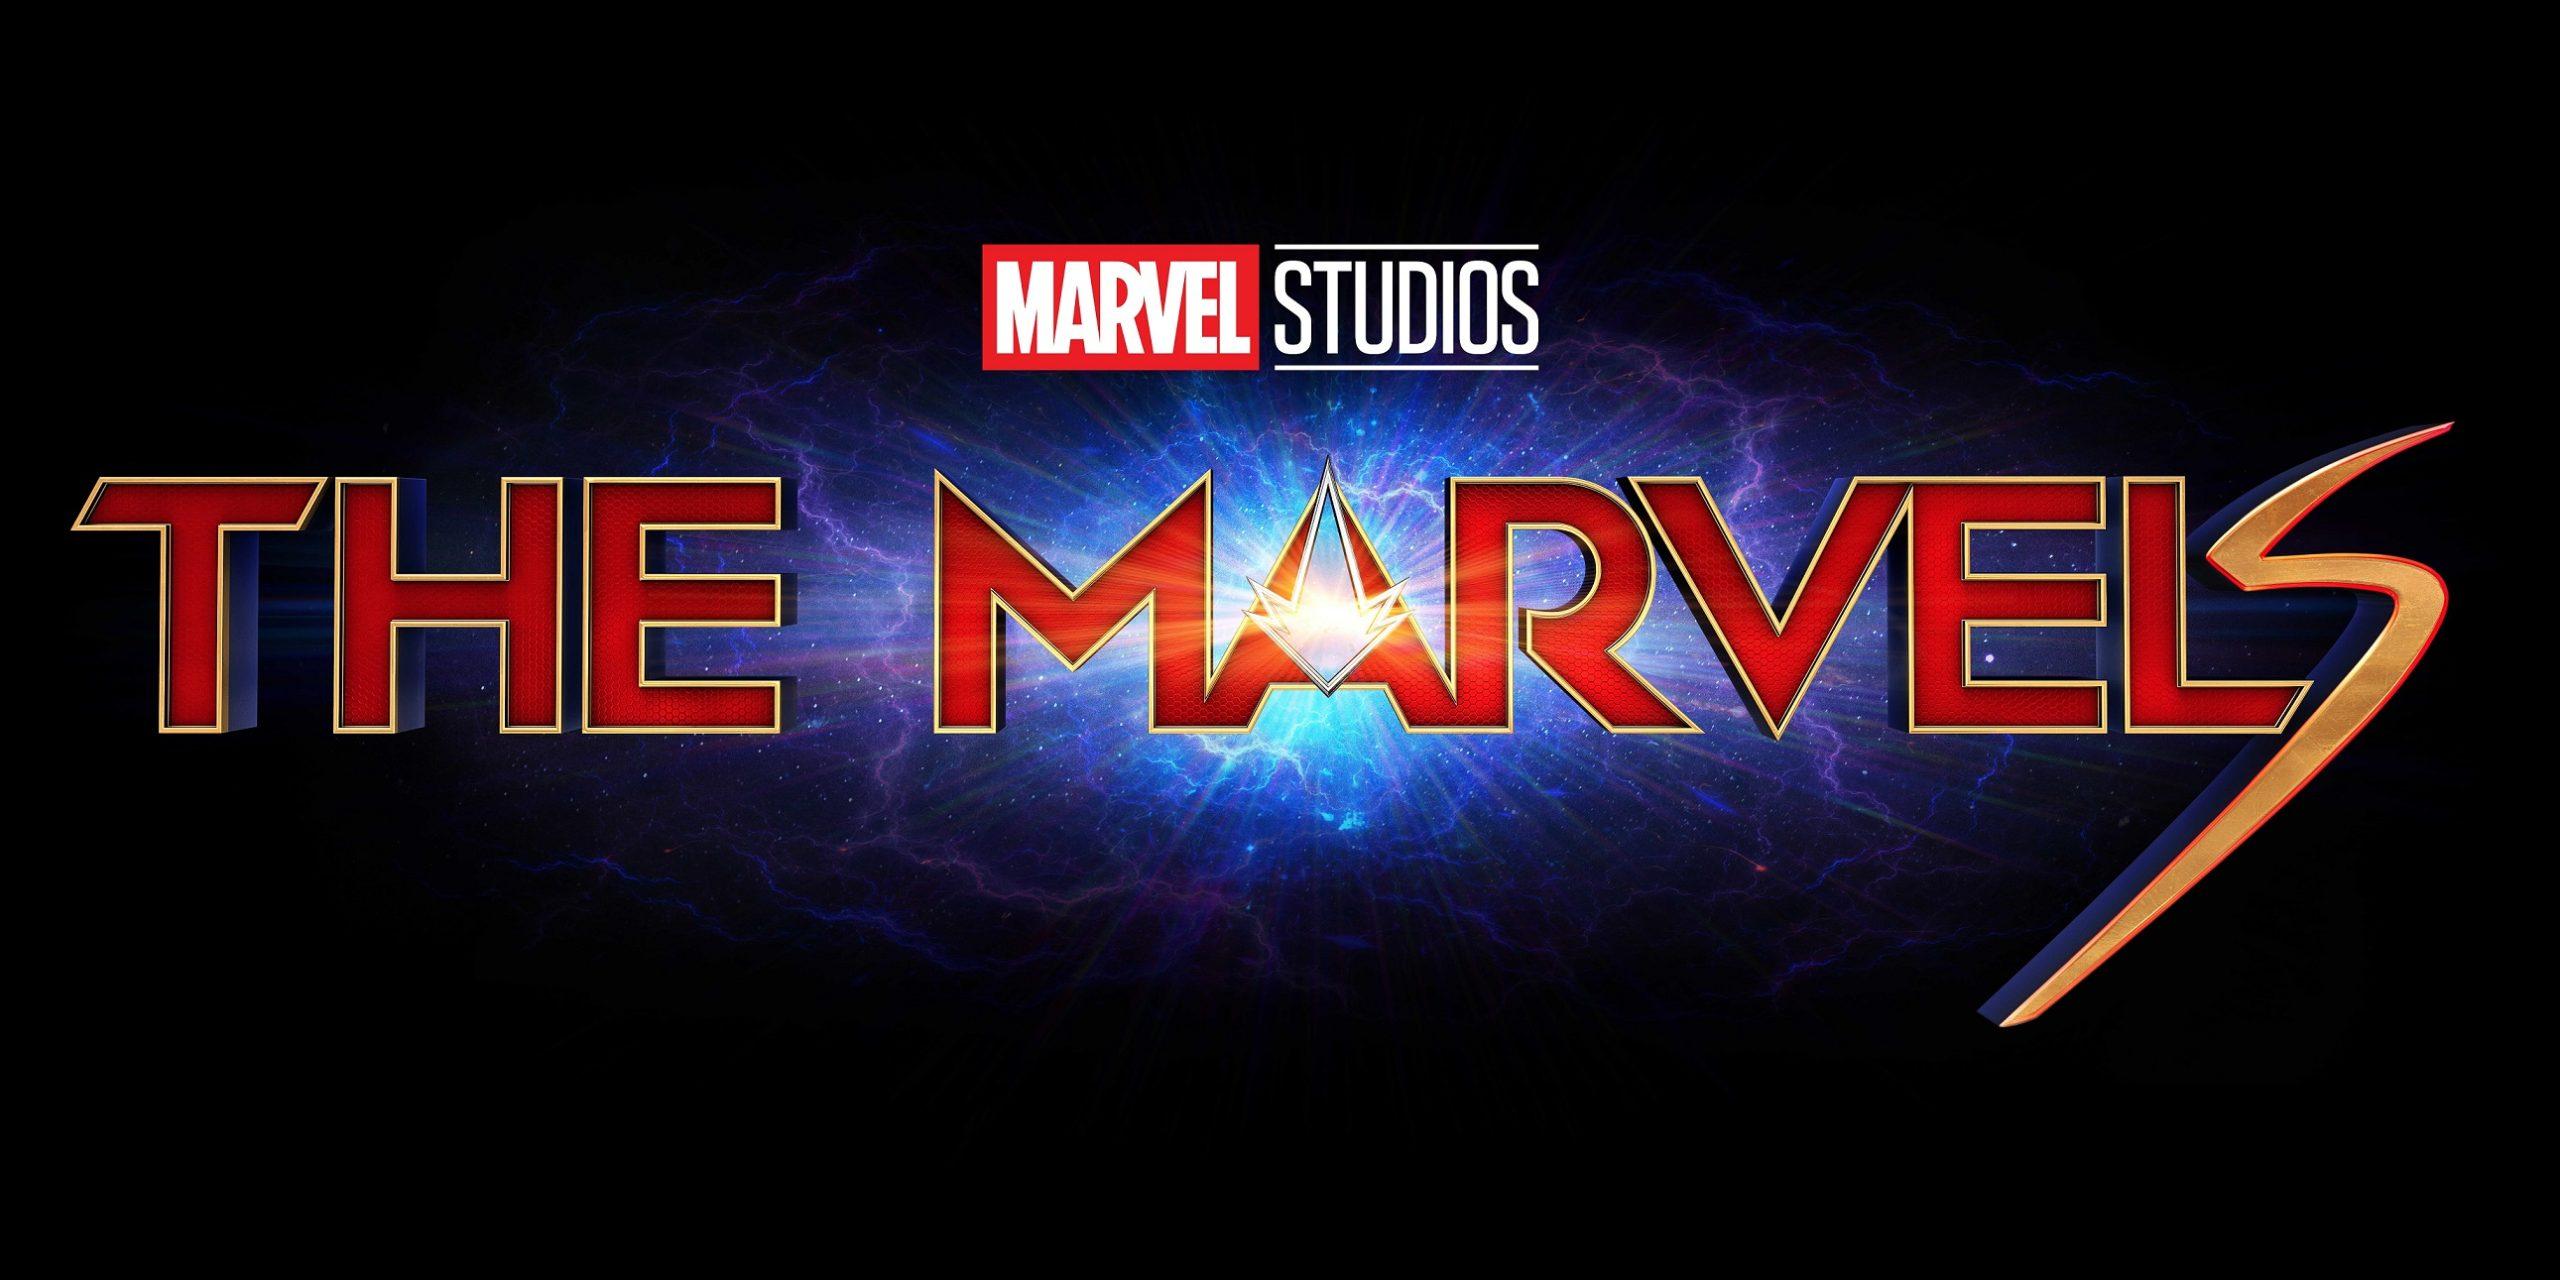 New The Marvels Trailer Makes It Look Like One of the Good Films